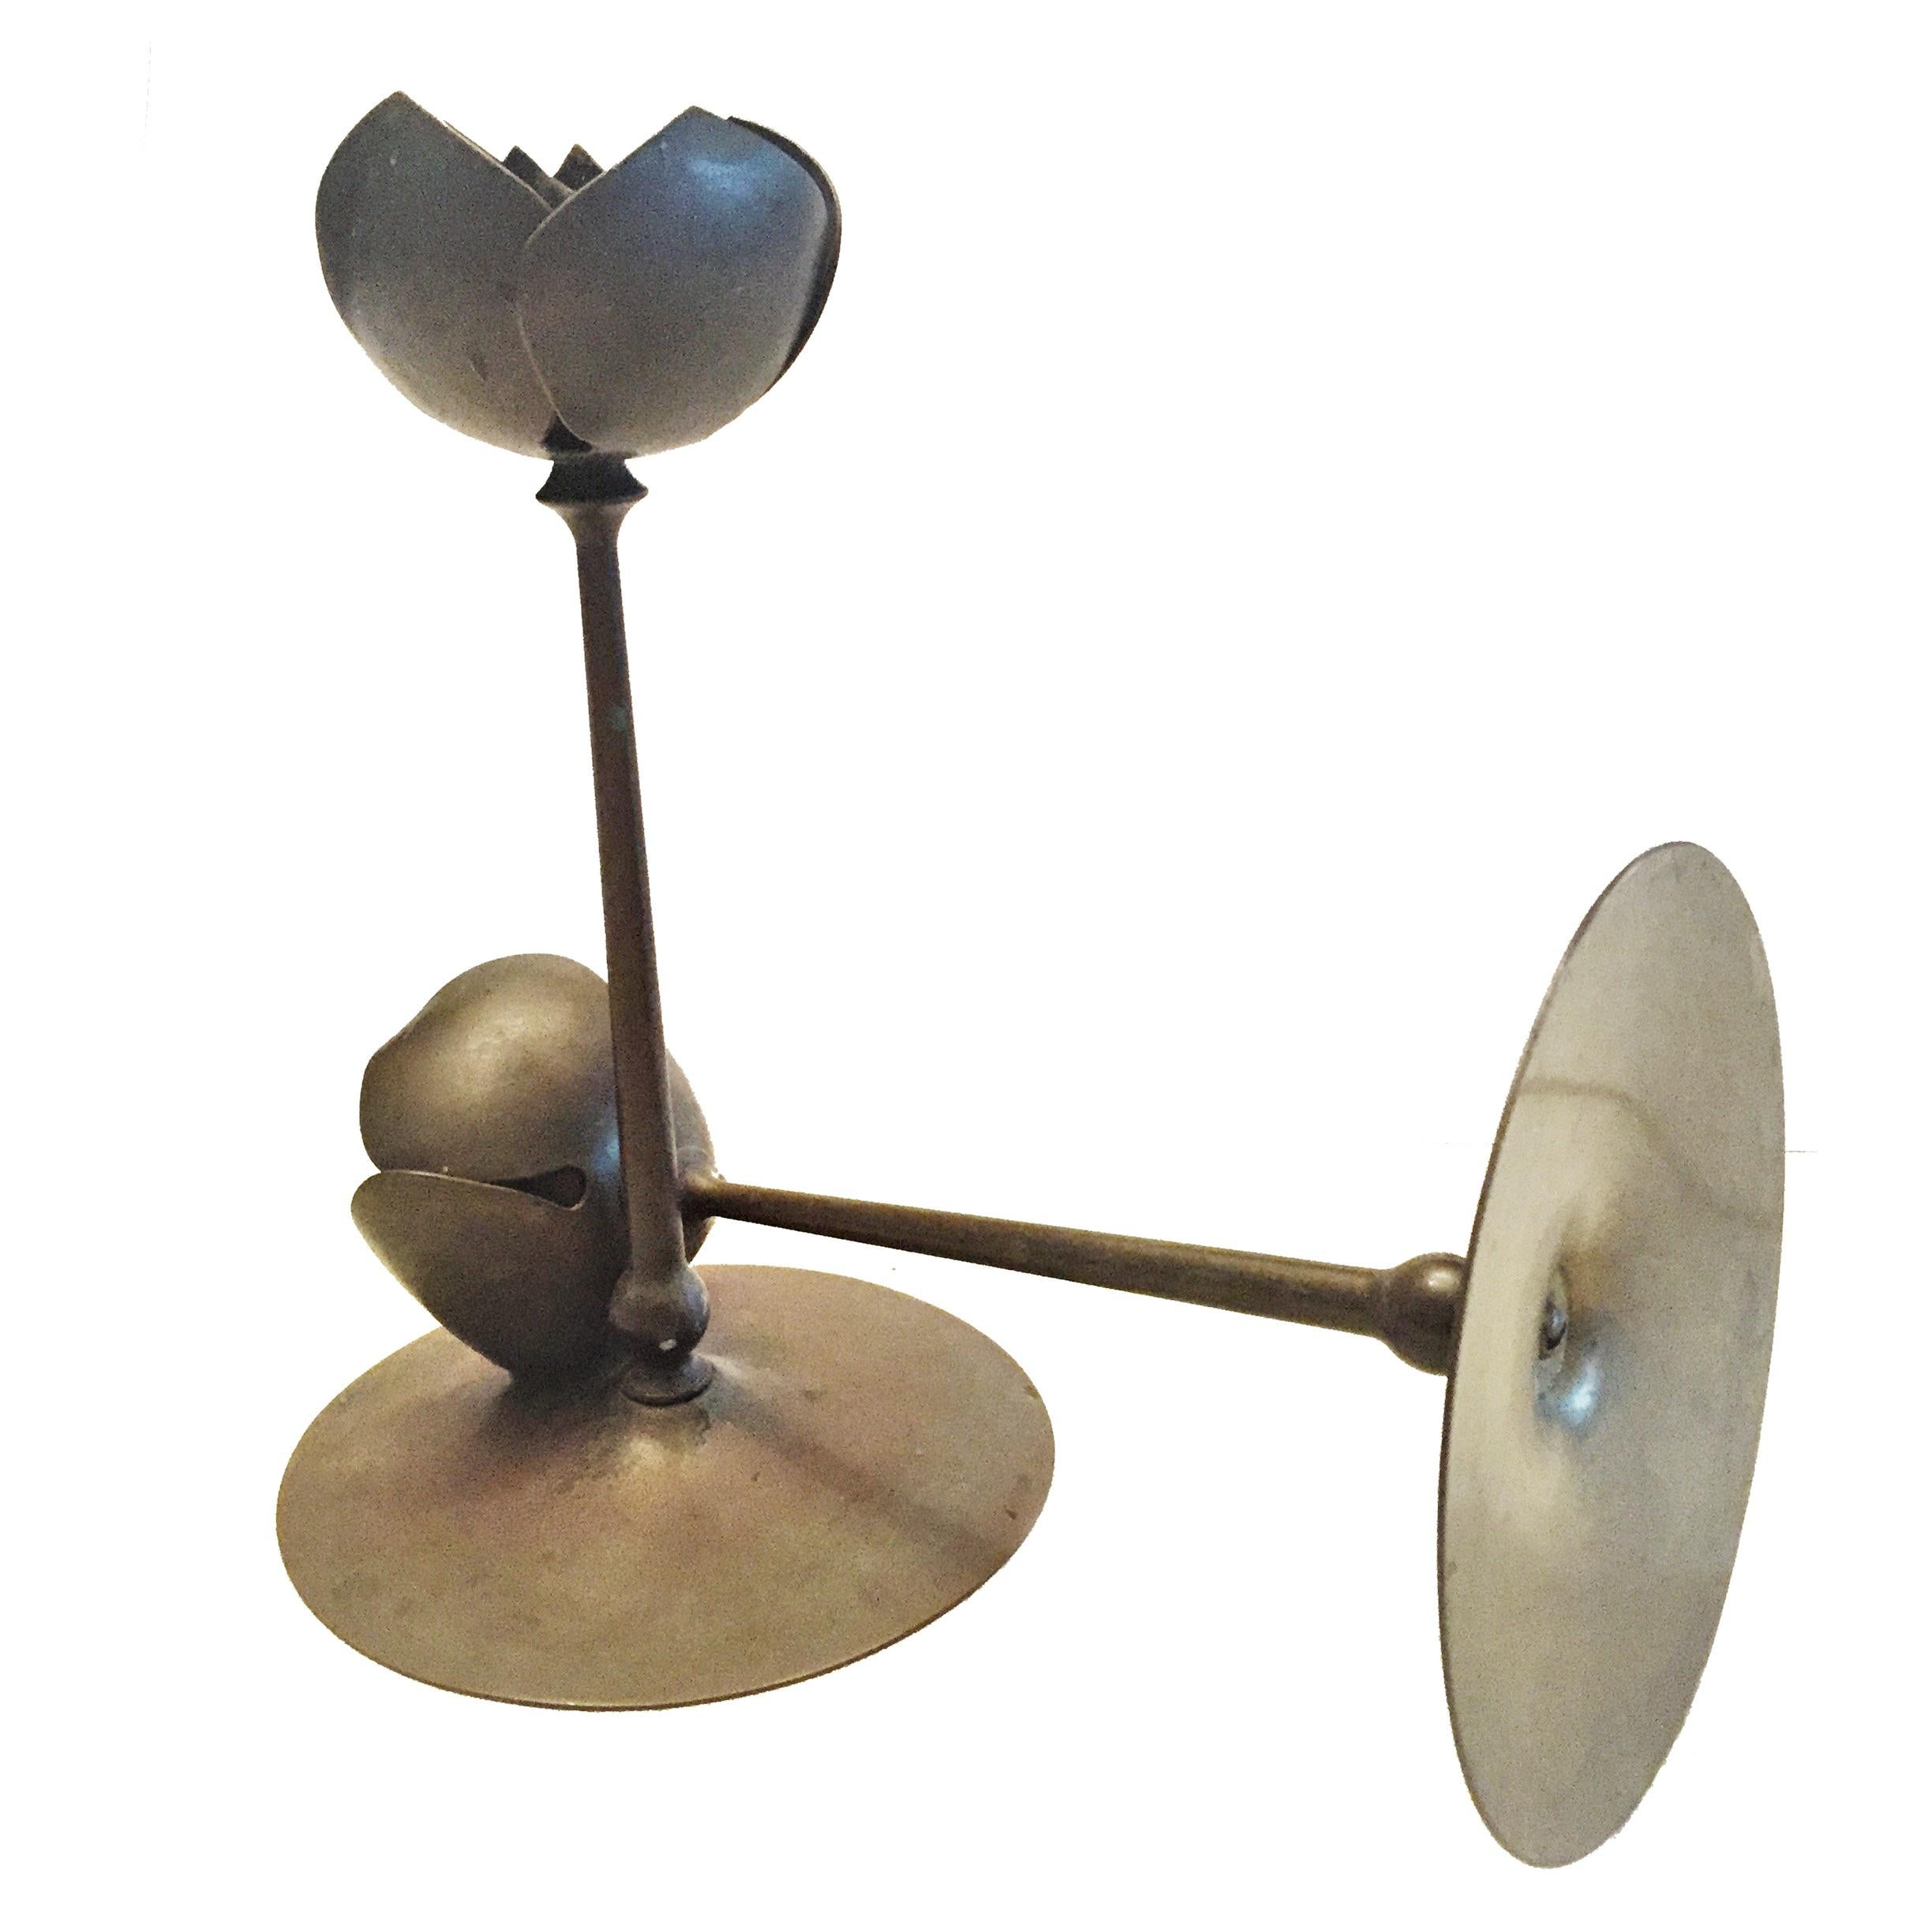 Pair of Mid-Century Modernist Anodized Brass Lotus Candlesticks, USA, 1950s For Sale 1